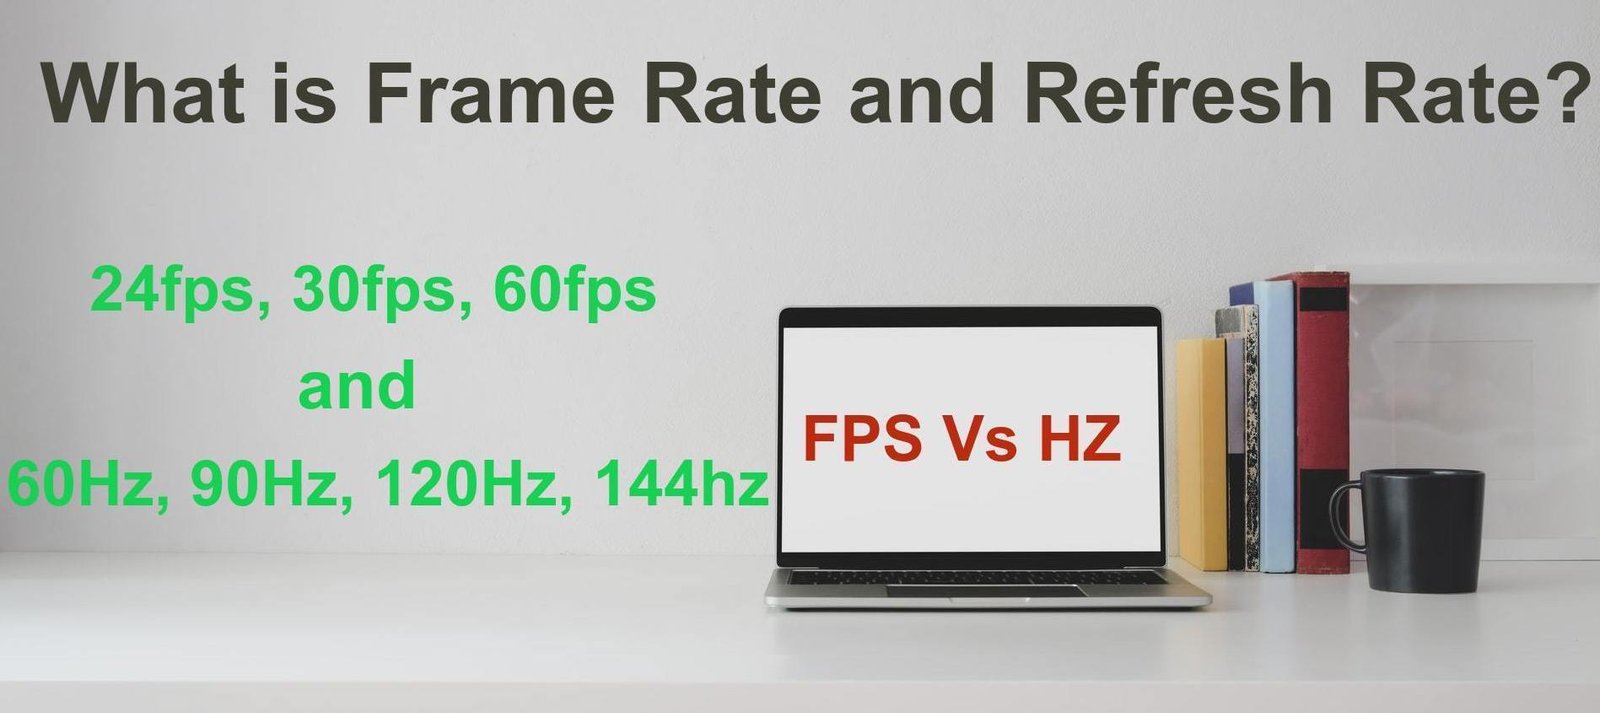 Frame rate and refresh rate